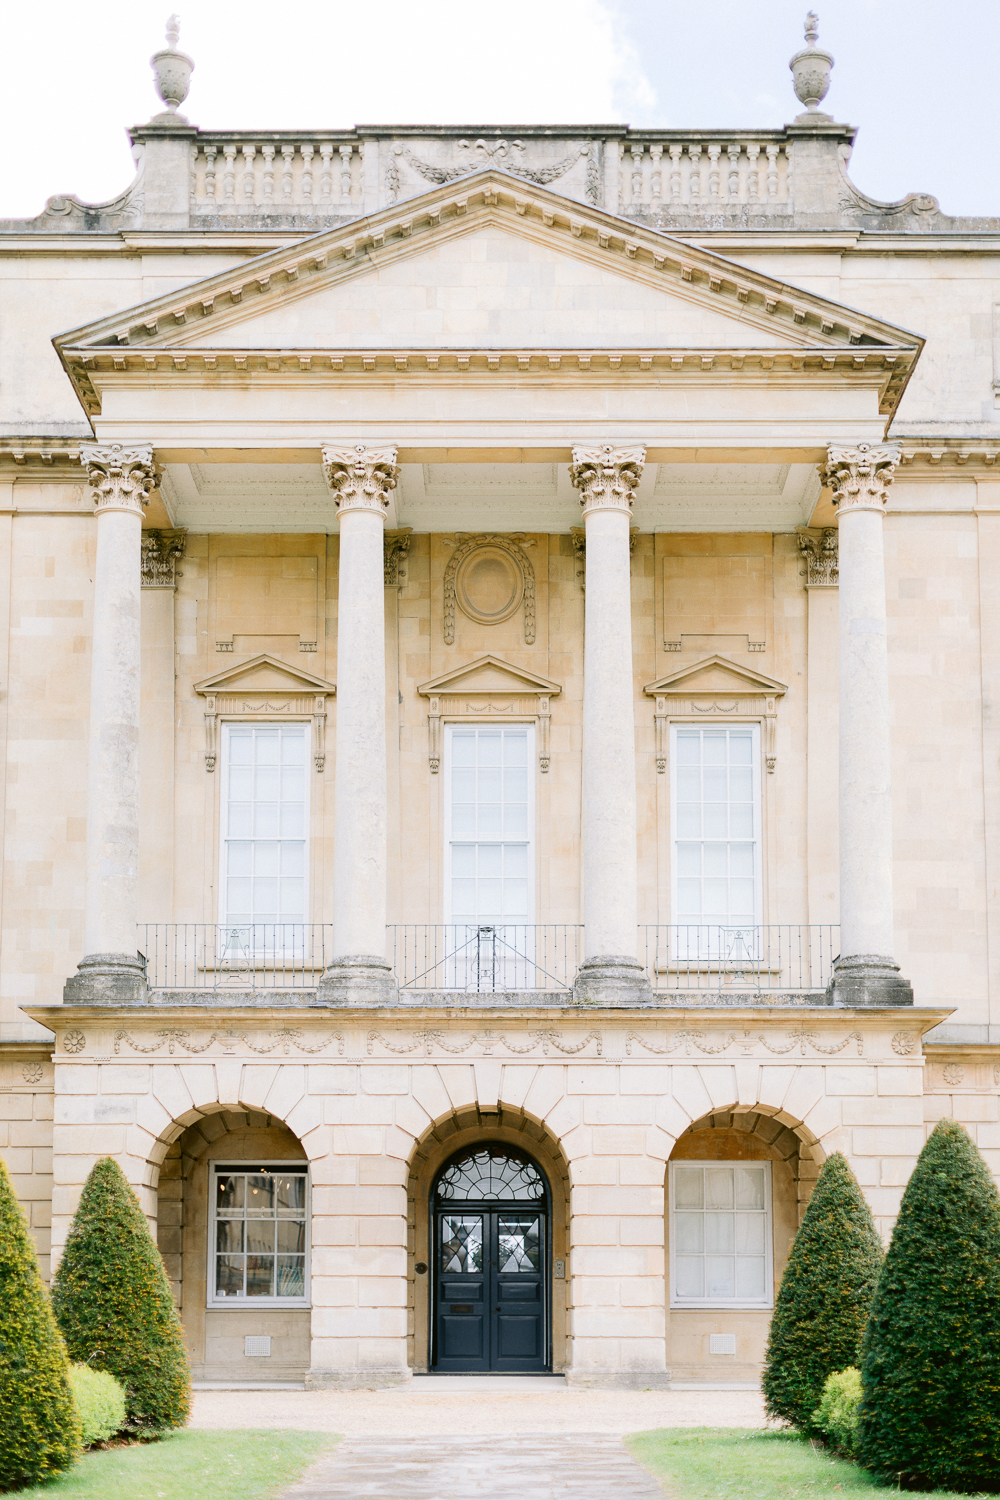 Lady Danbury House - The Holburne Museum in Bath, image of front balcony